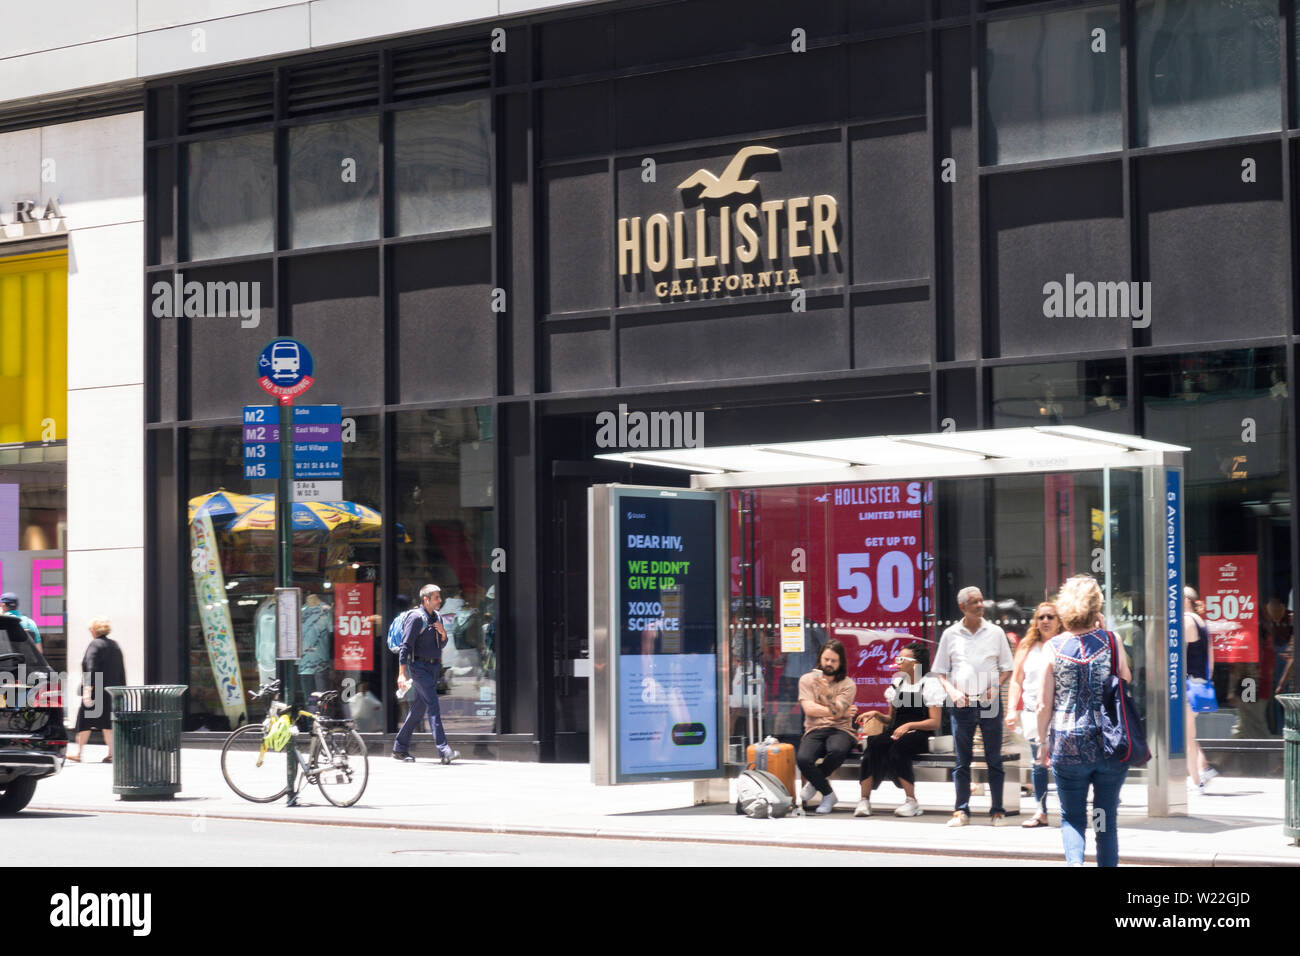 Crowds Outside the Hollister California Store on Fifth Avenue, NYC, USA Stock Photo